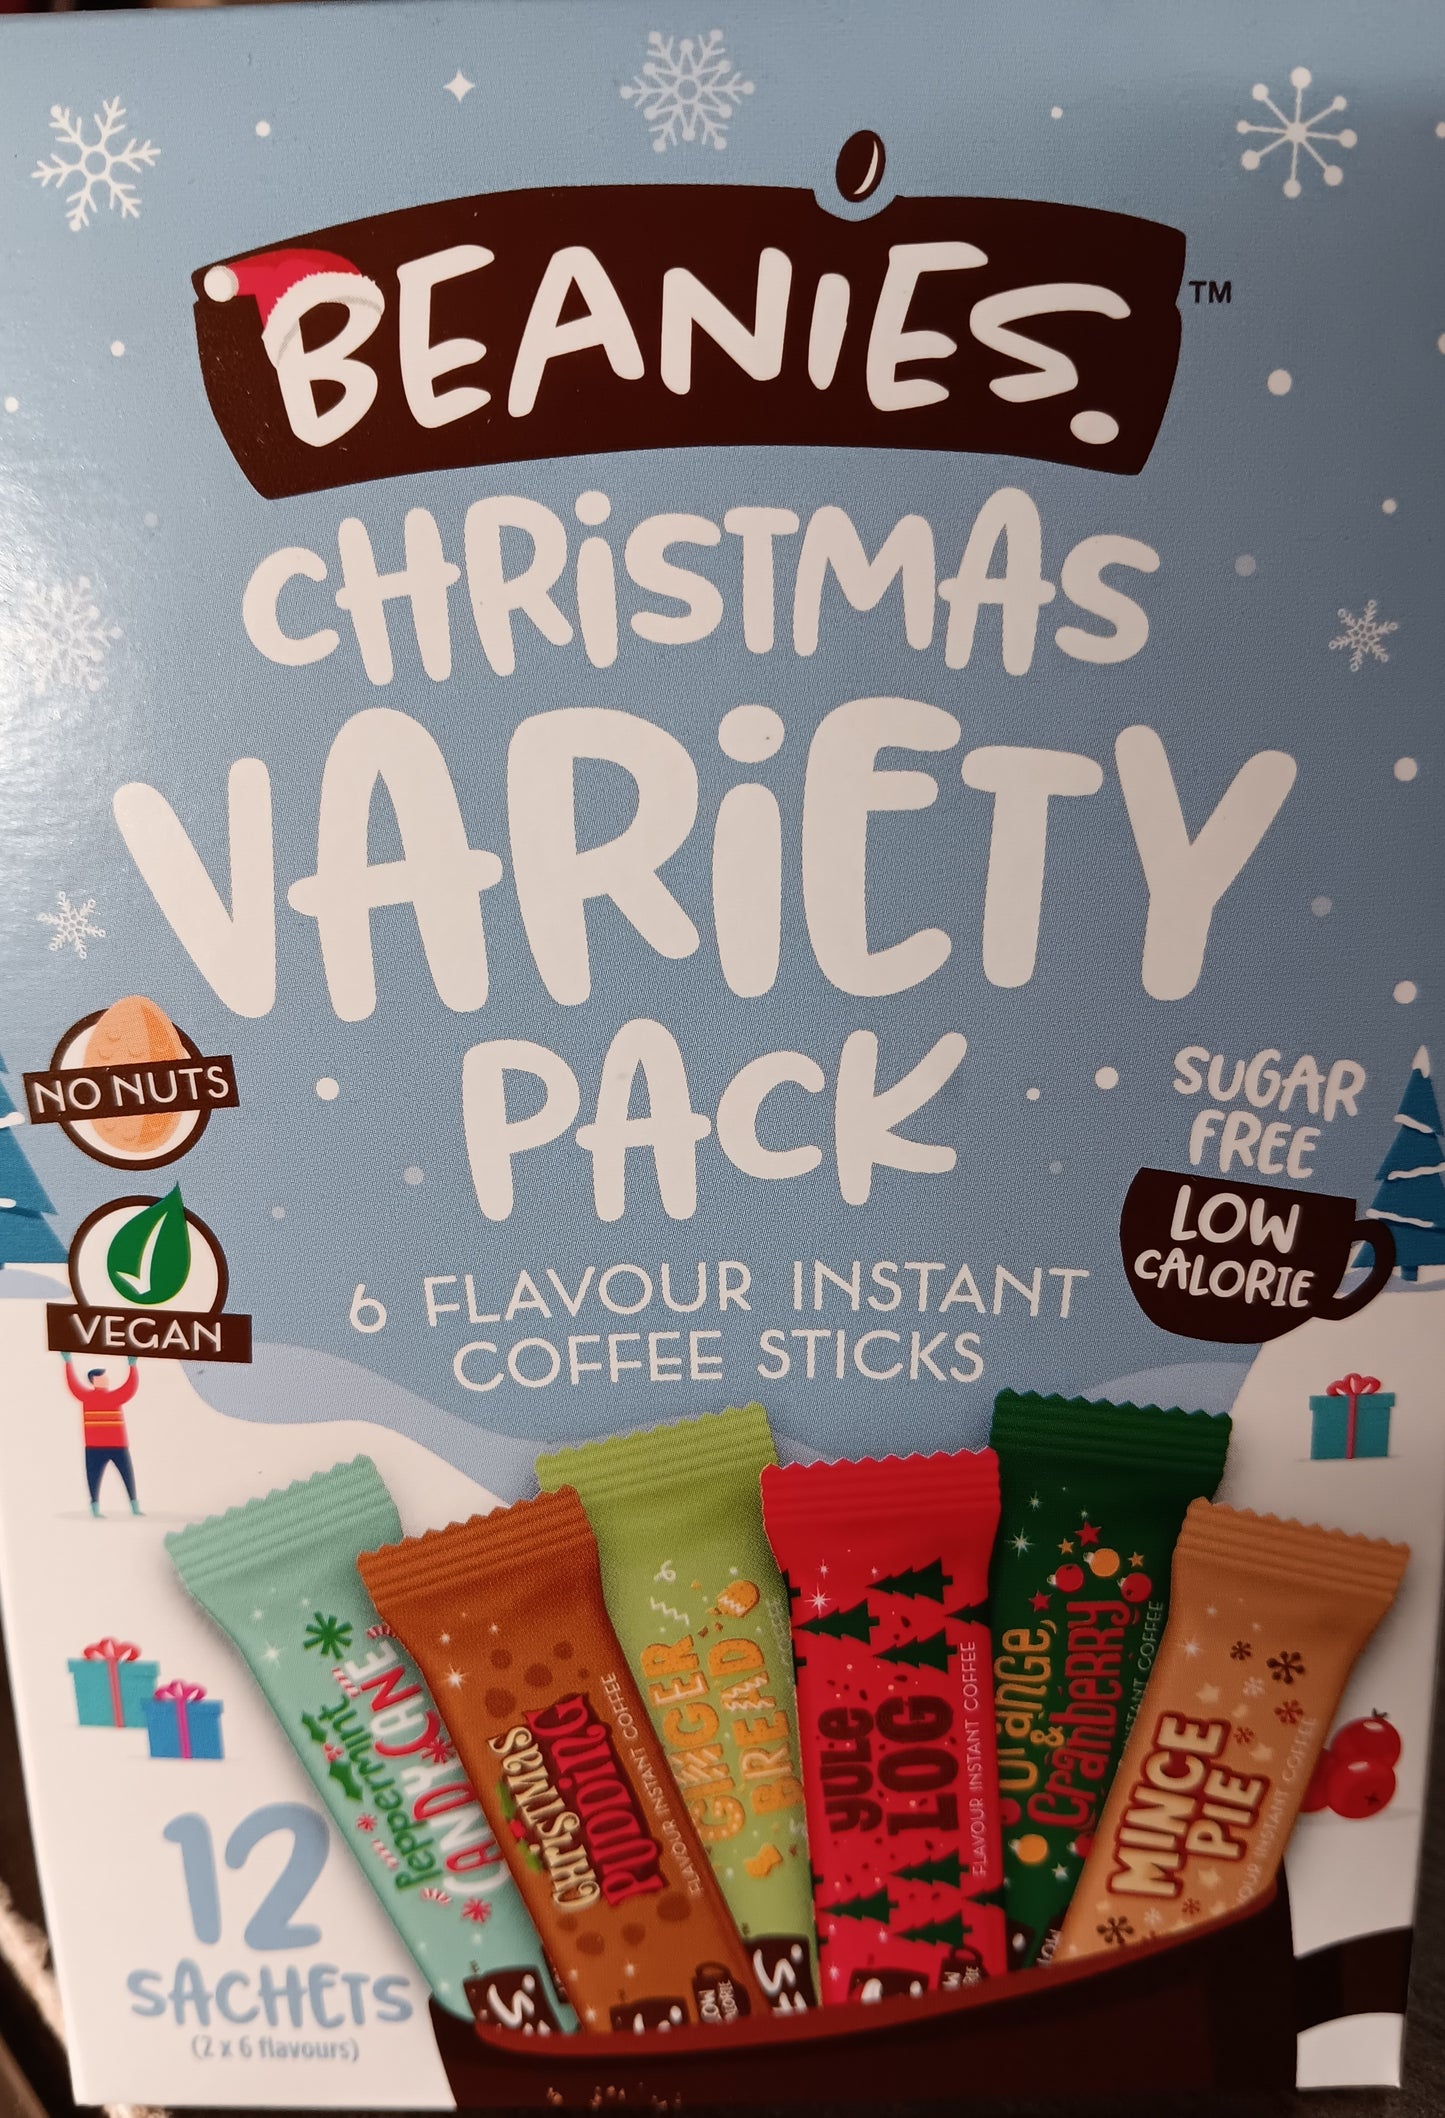 Beanies Christmas Variety Pack Instant Coffee Sticks